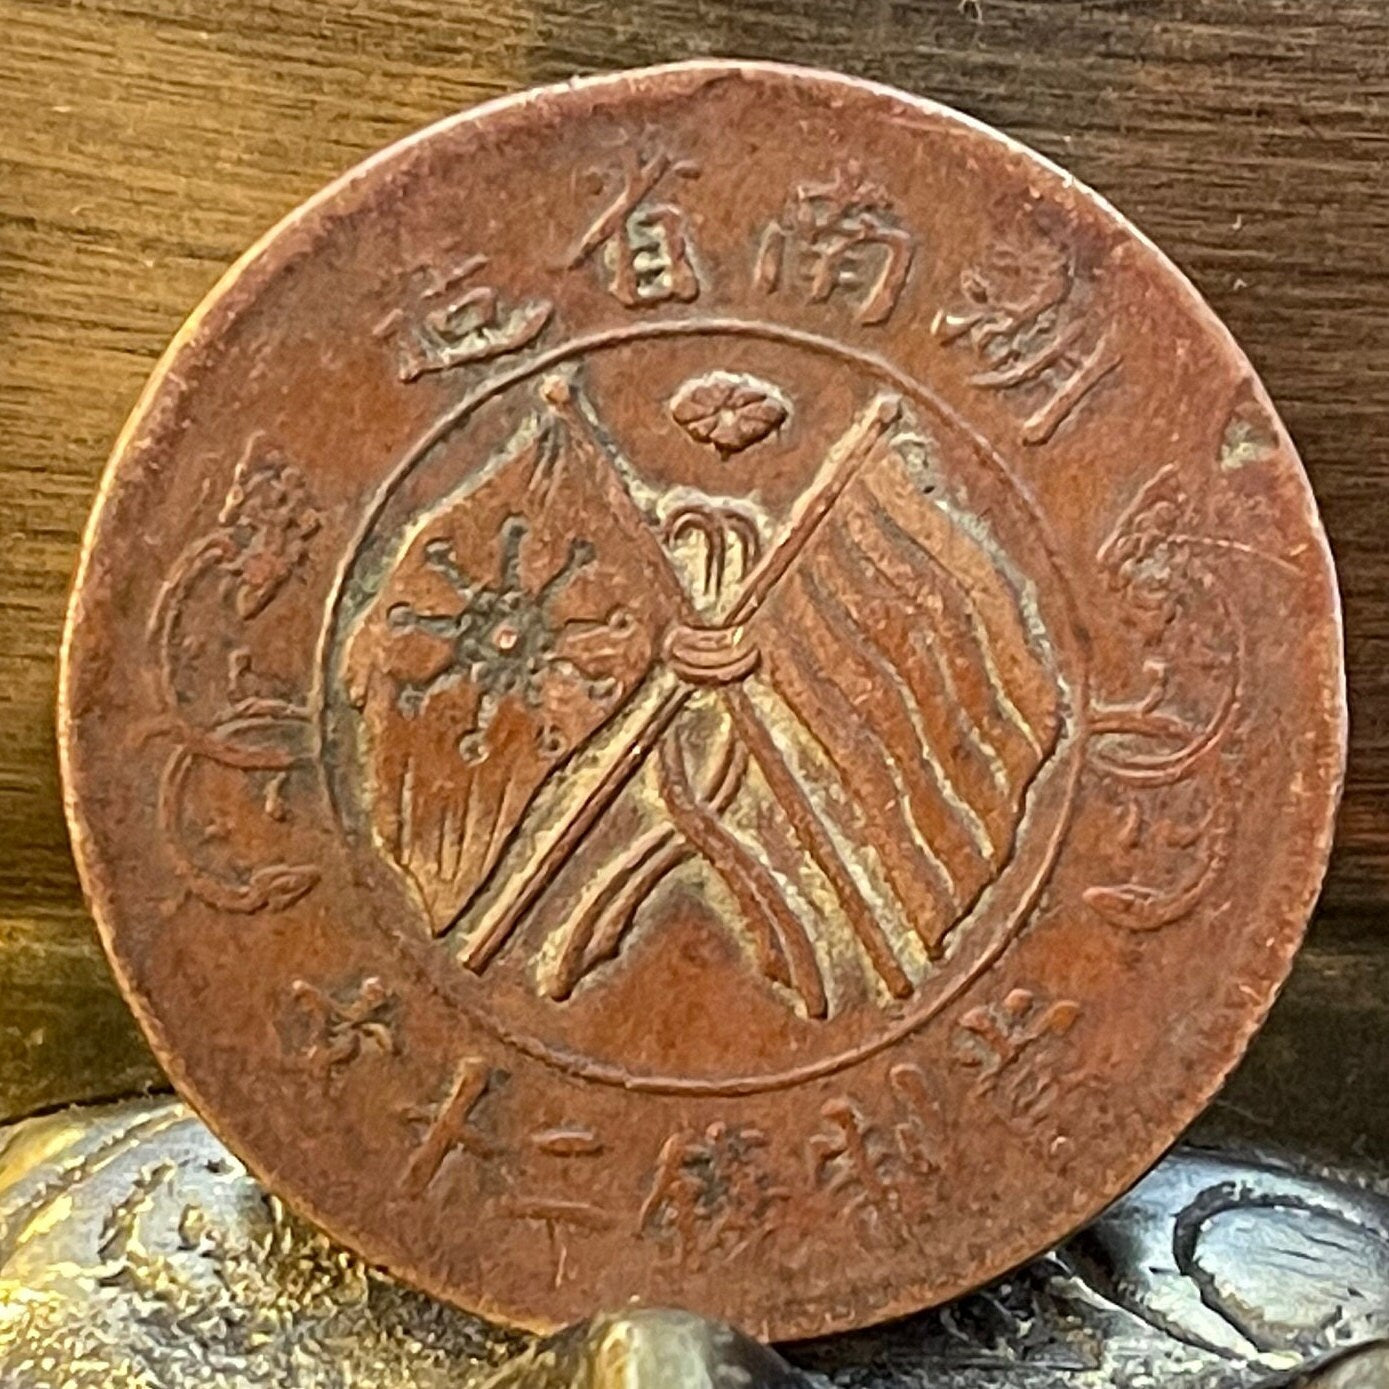 Blue Sky White Sun Kuomintang Flag & Five-Colored Flag of the Republic 20 Cash Hunan China Authentic Coin Money for Jewelry (Rice) (1919)